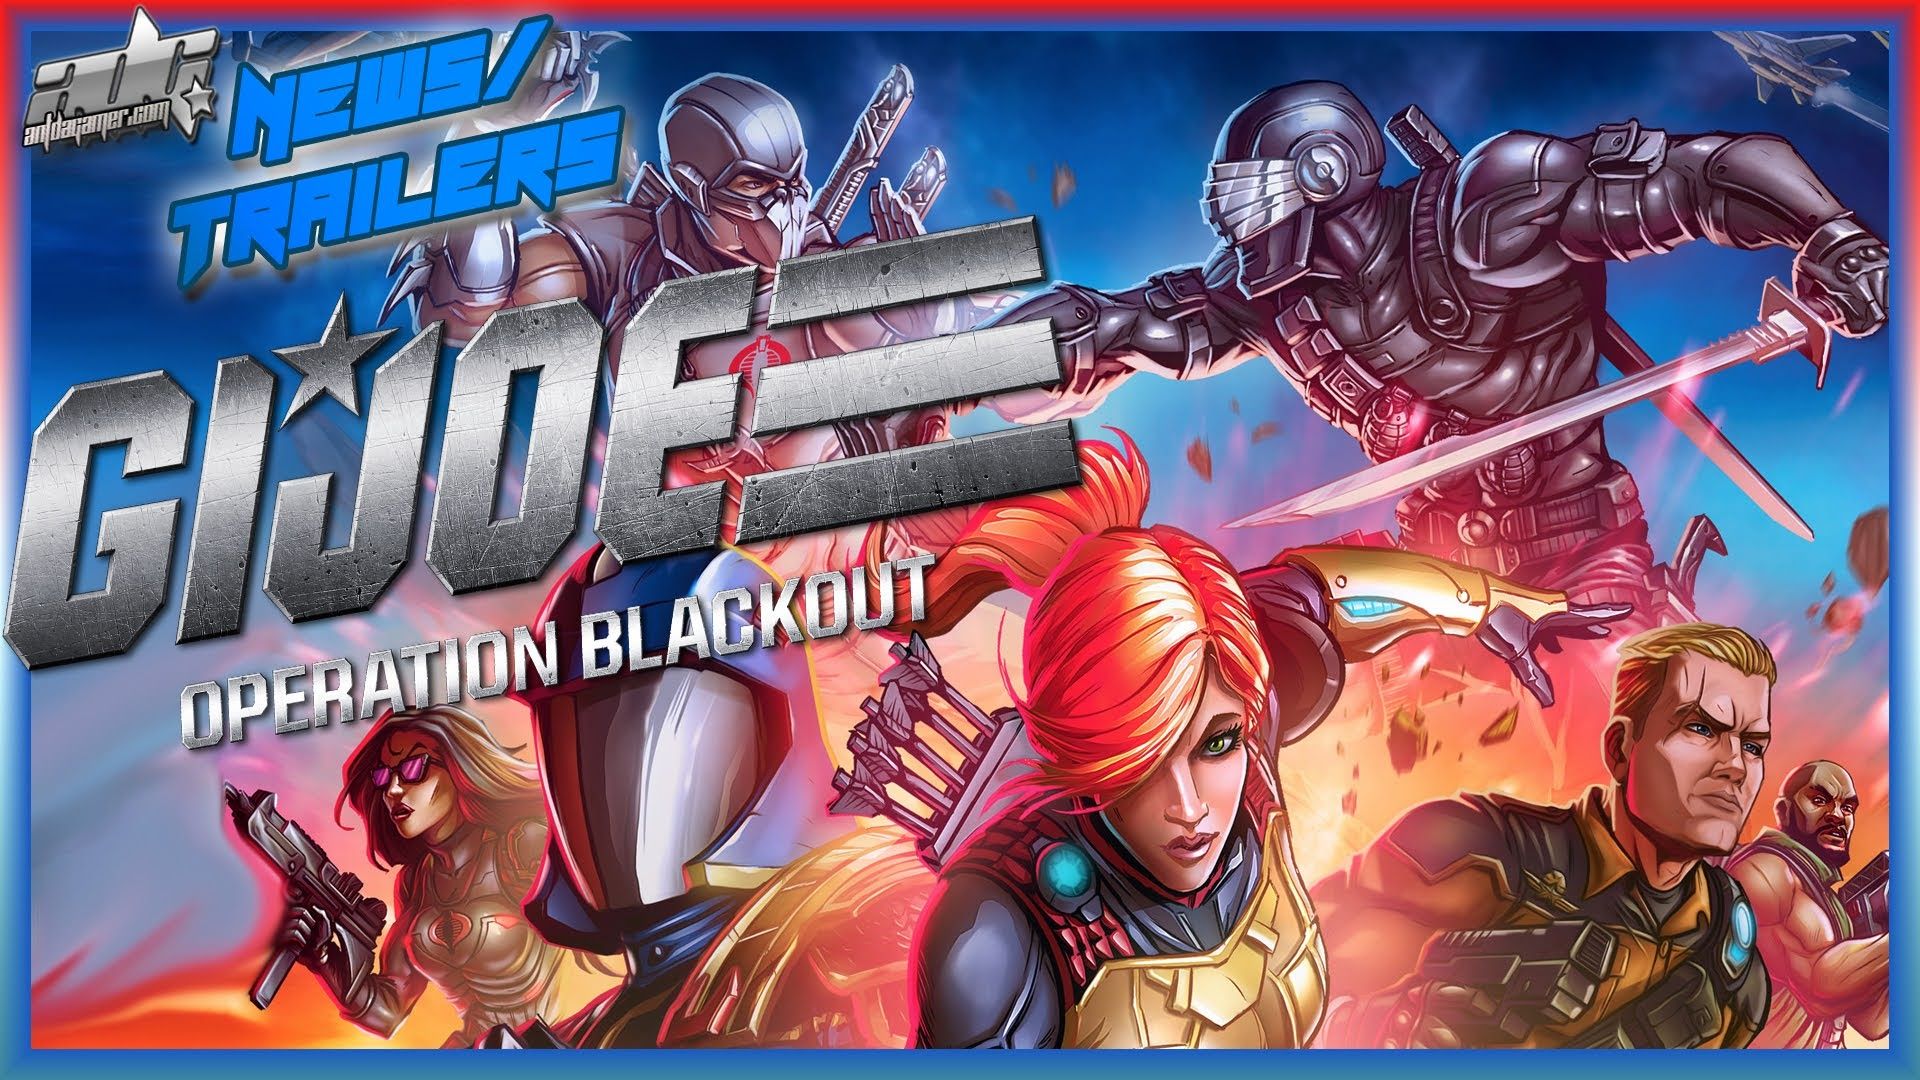 G.I. Joe Operation Blackout Reveal Trailer, Screenshots, And Image Preview